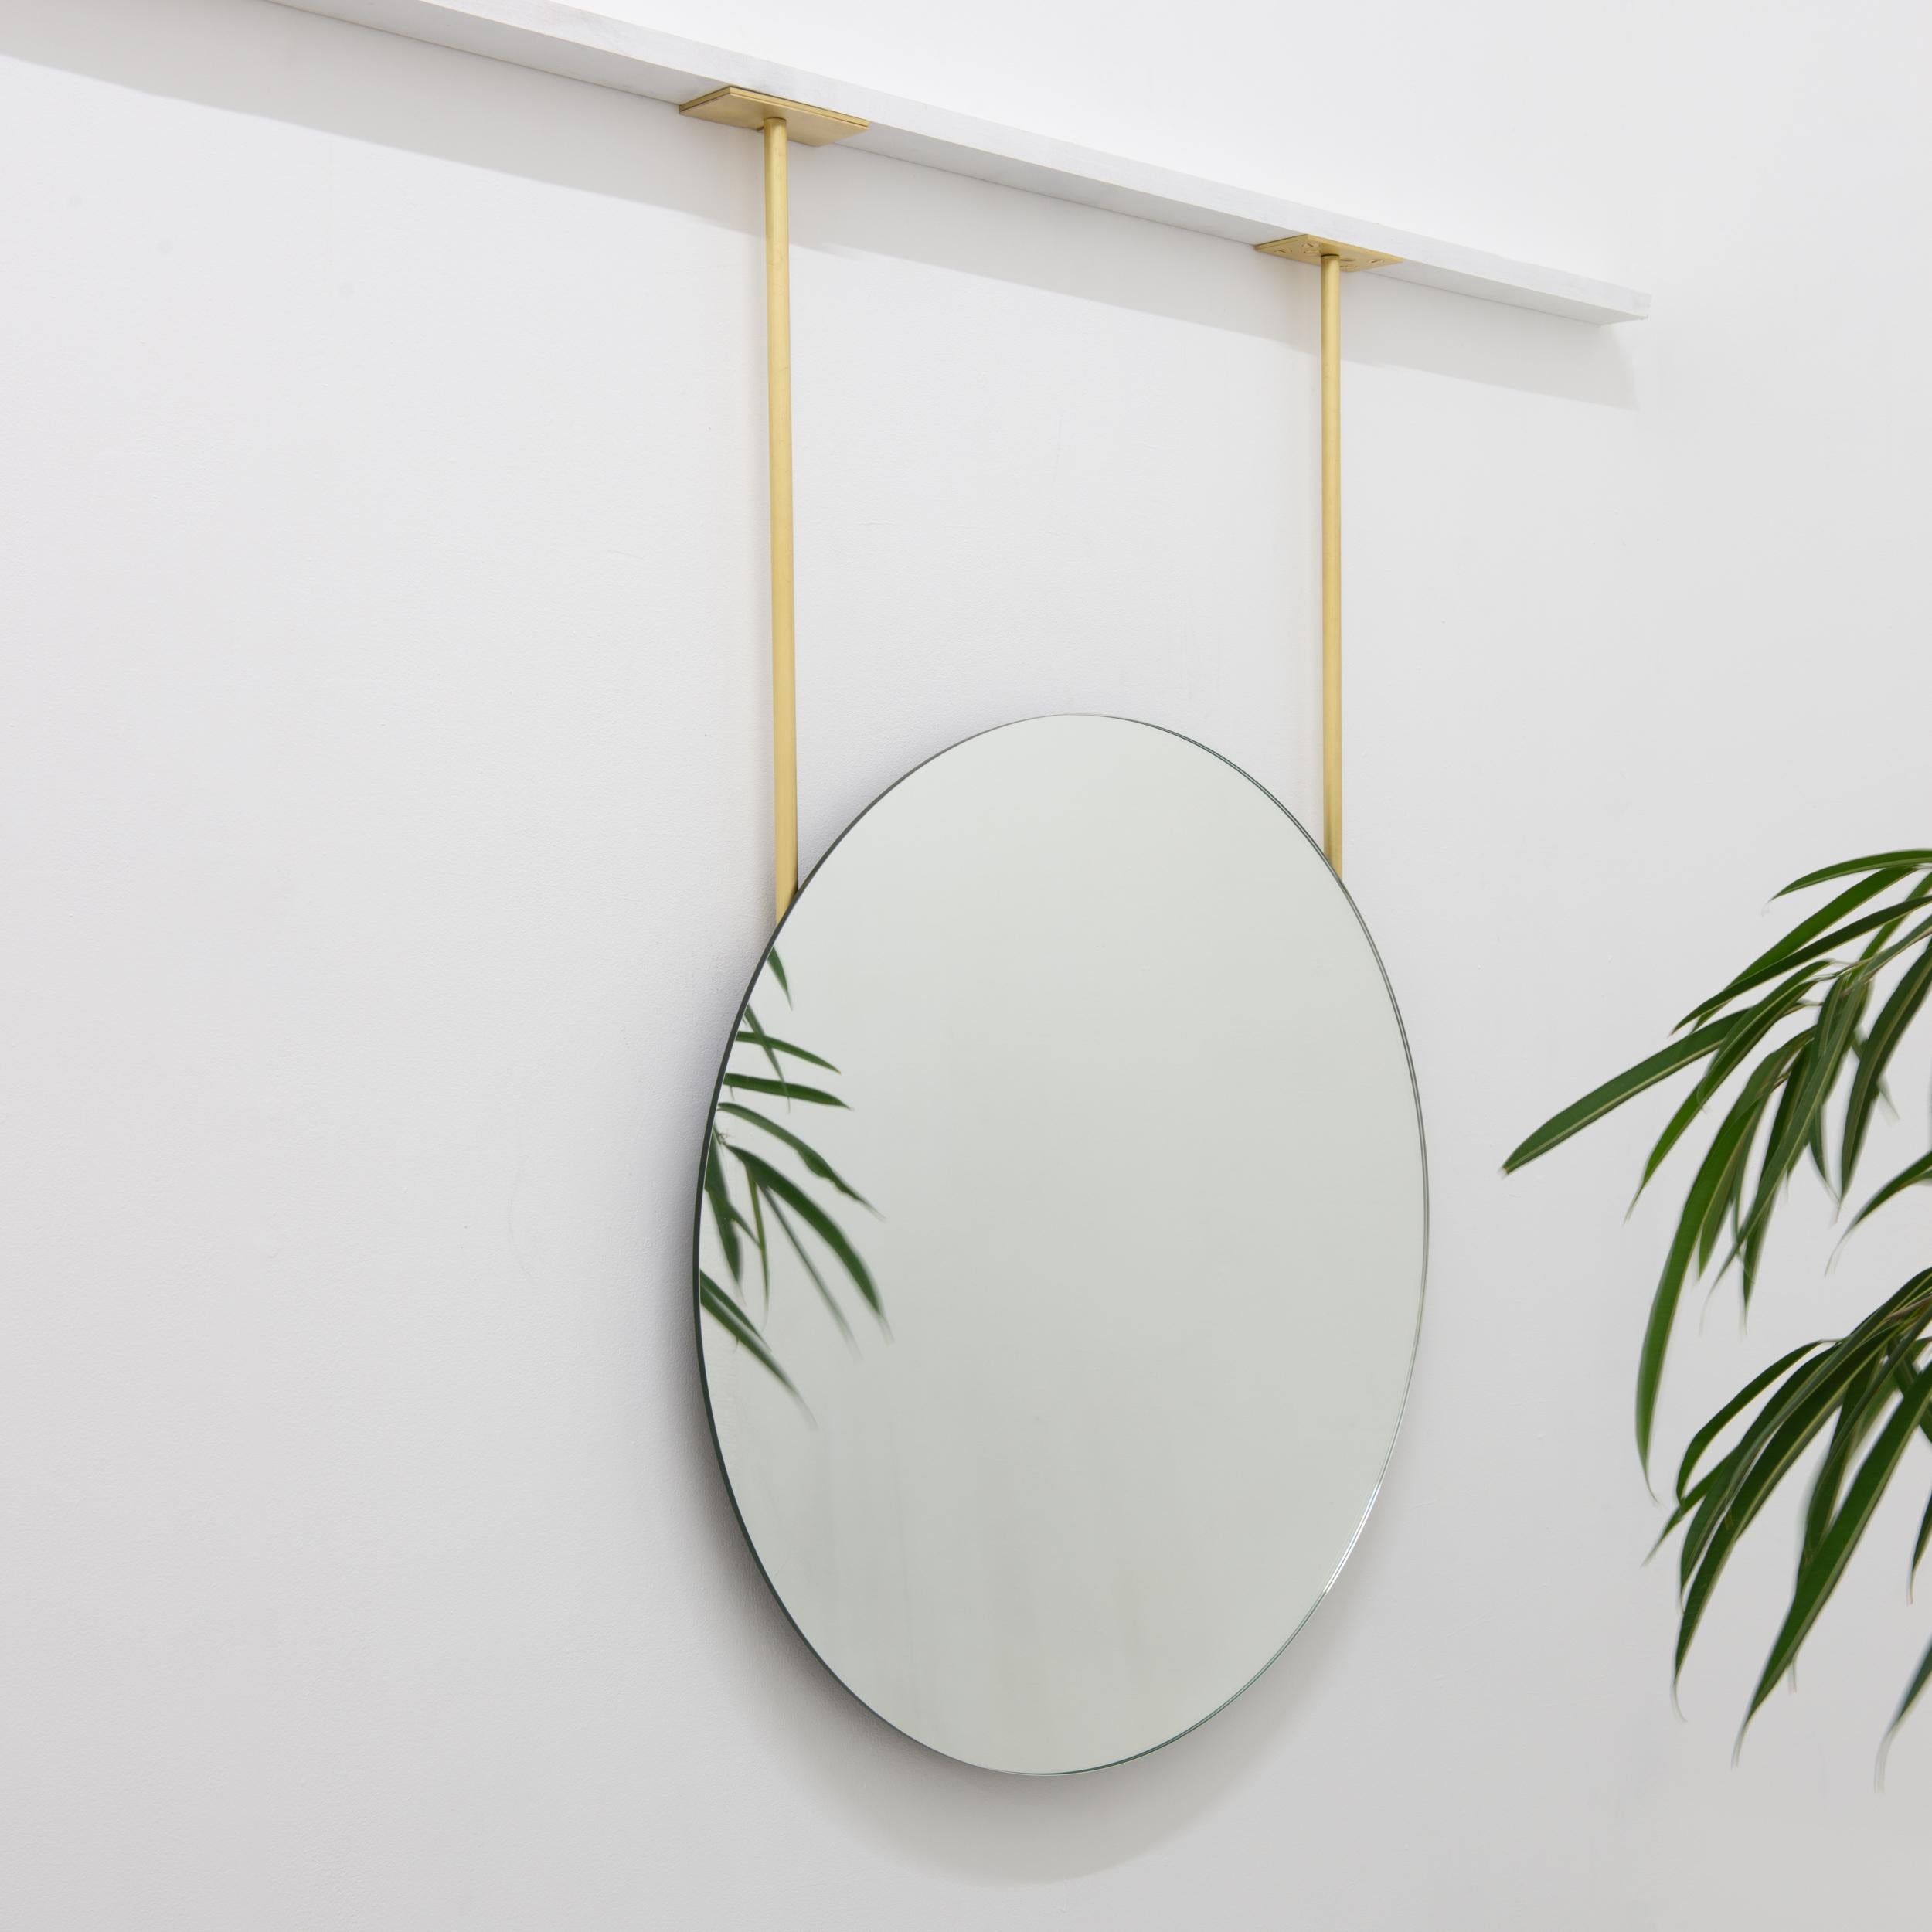 Exquisite and minimalist modern ceiling suspended round frameless mirror.

600mm (23.62